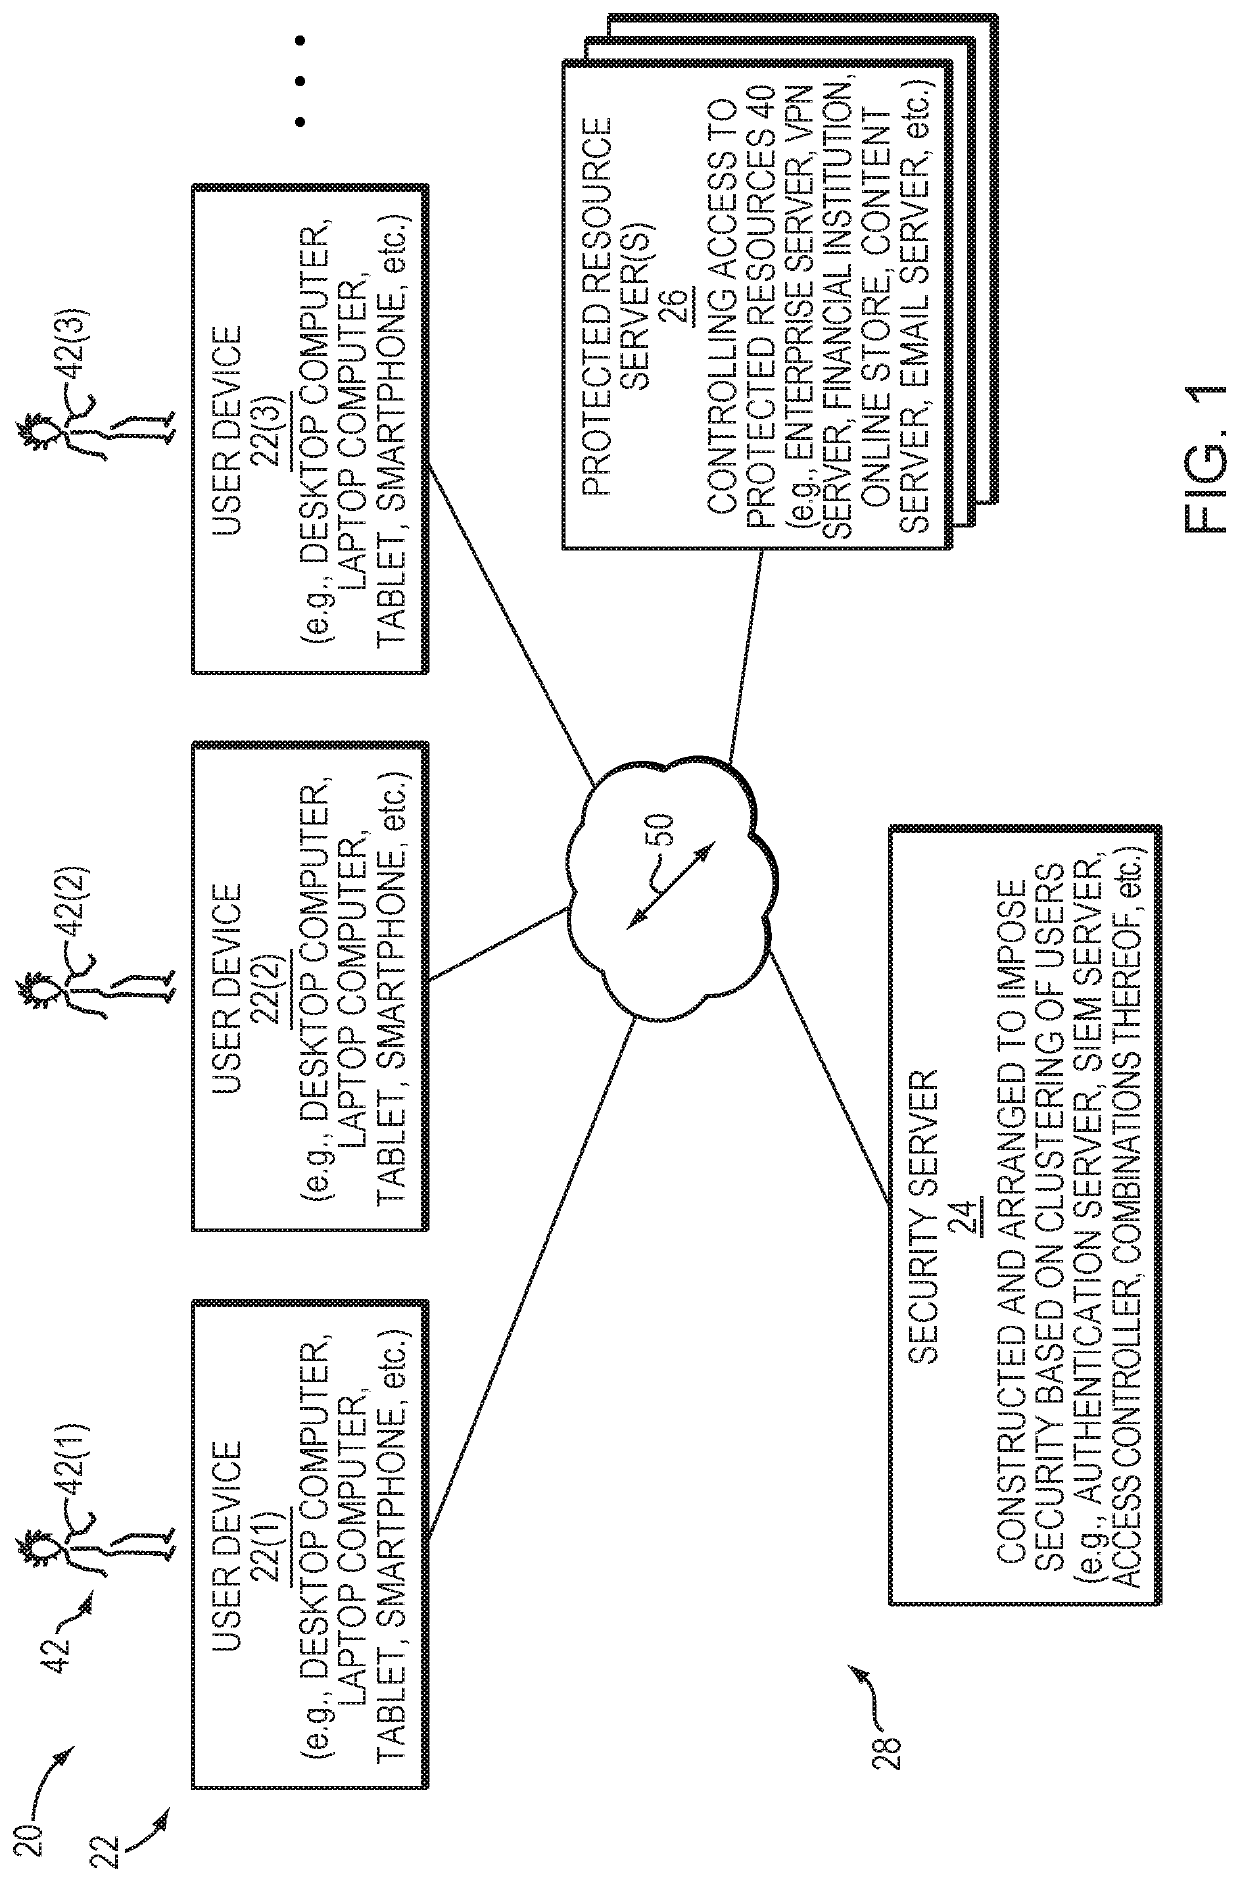 Method, apparatus and computer program product for providing security via user clustering